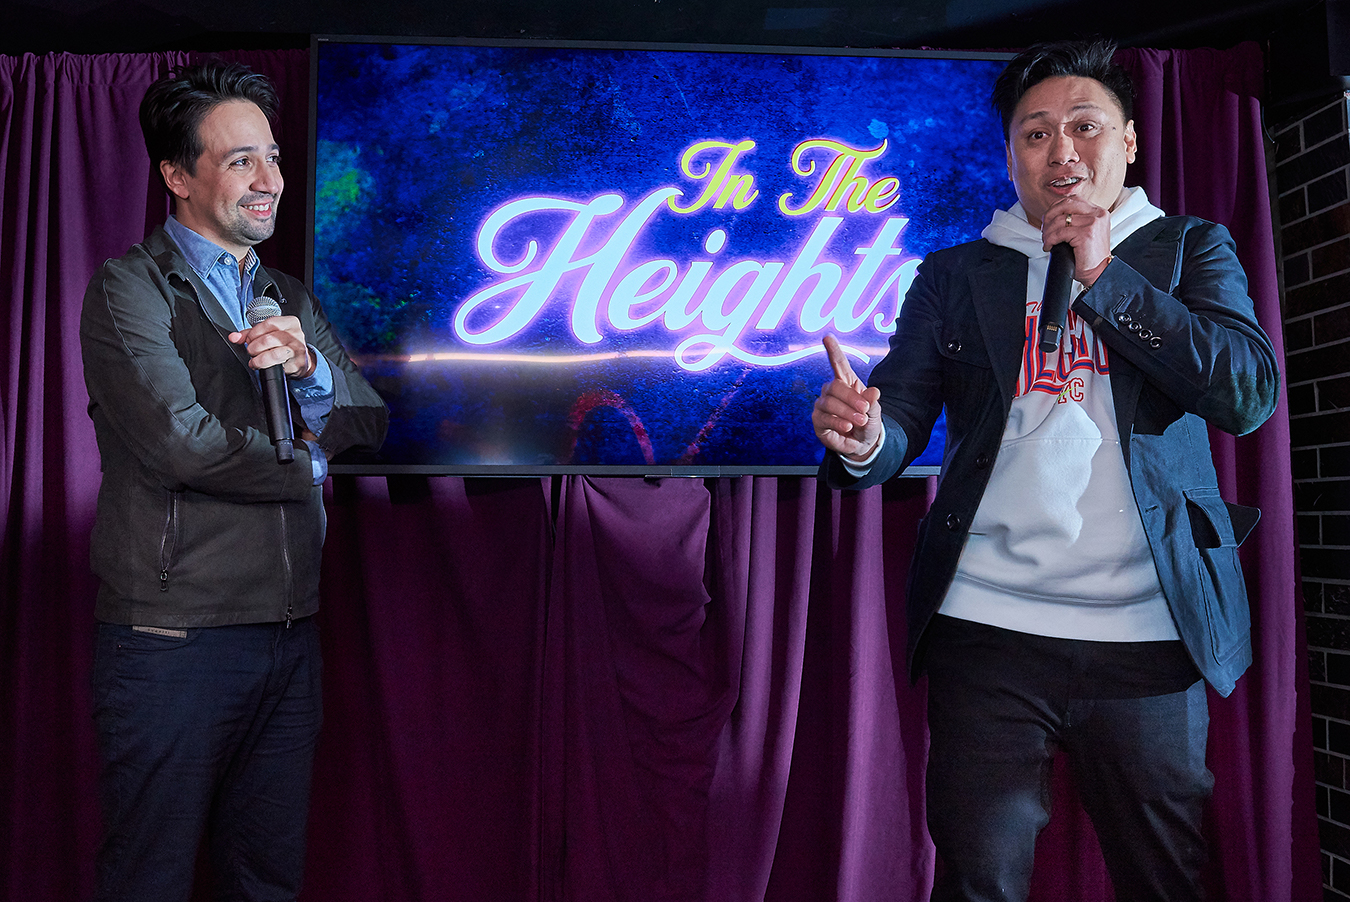 Warner Bros. Pictures trailer launch event for IN THE HEIGHTS, 809 Restaurant & Lounge, WASHINGTON HEIGHTS, NY, USA- 11 Dec 2019 LIN-MANUEL MIRANDA & JON CHU